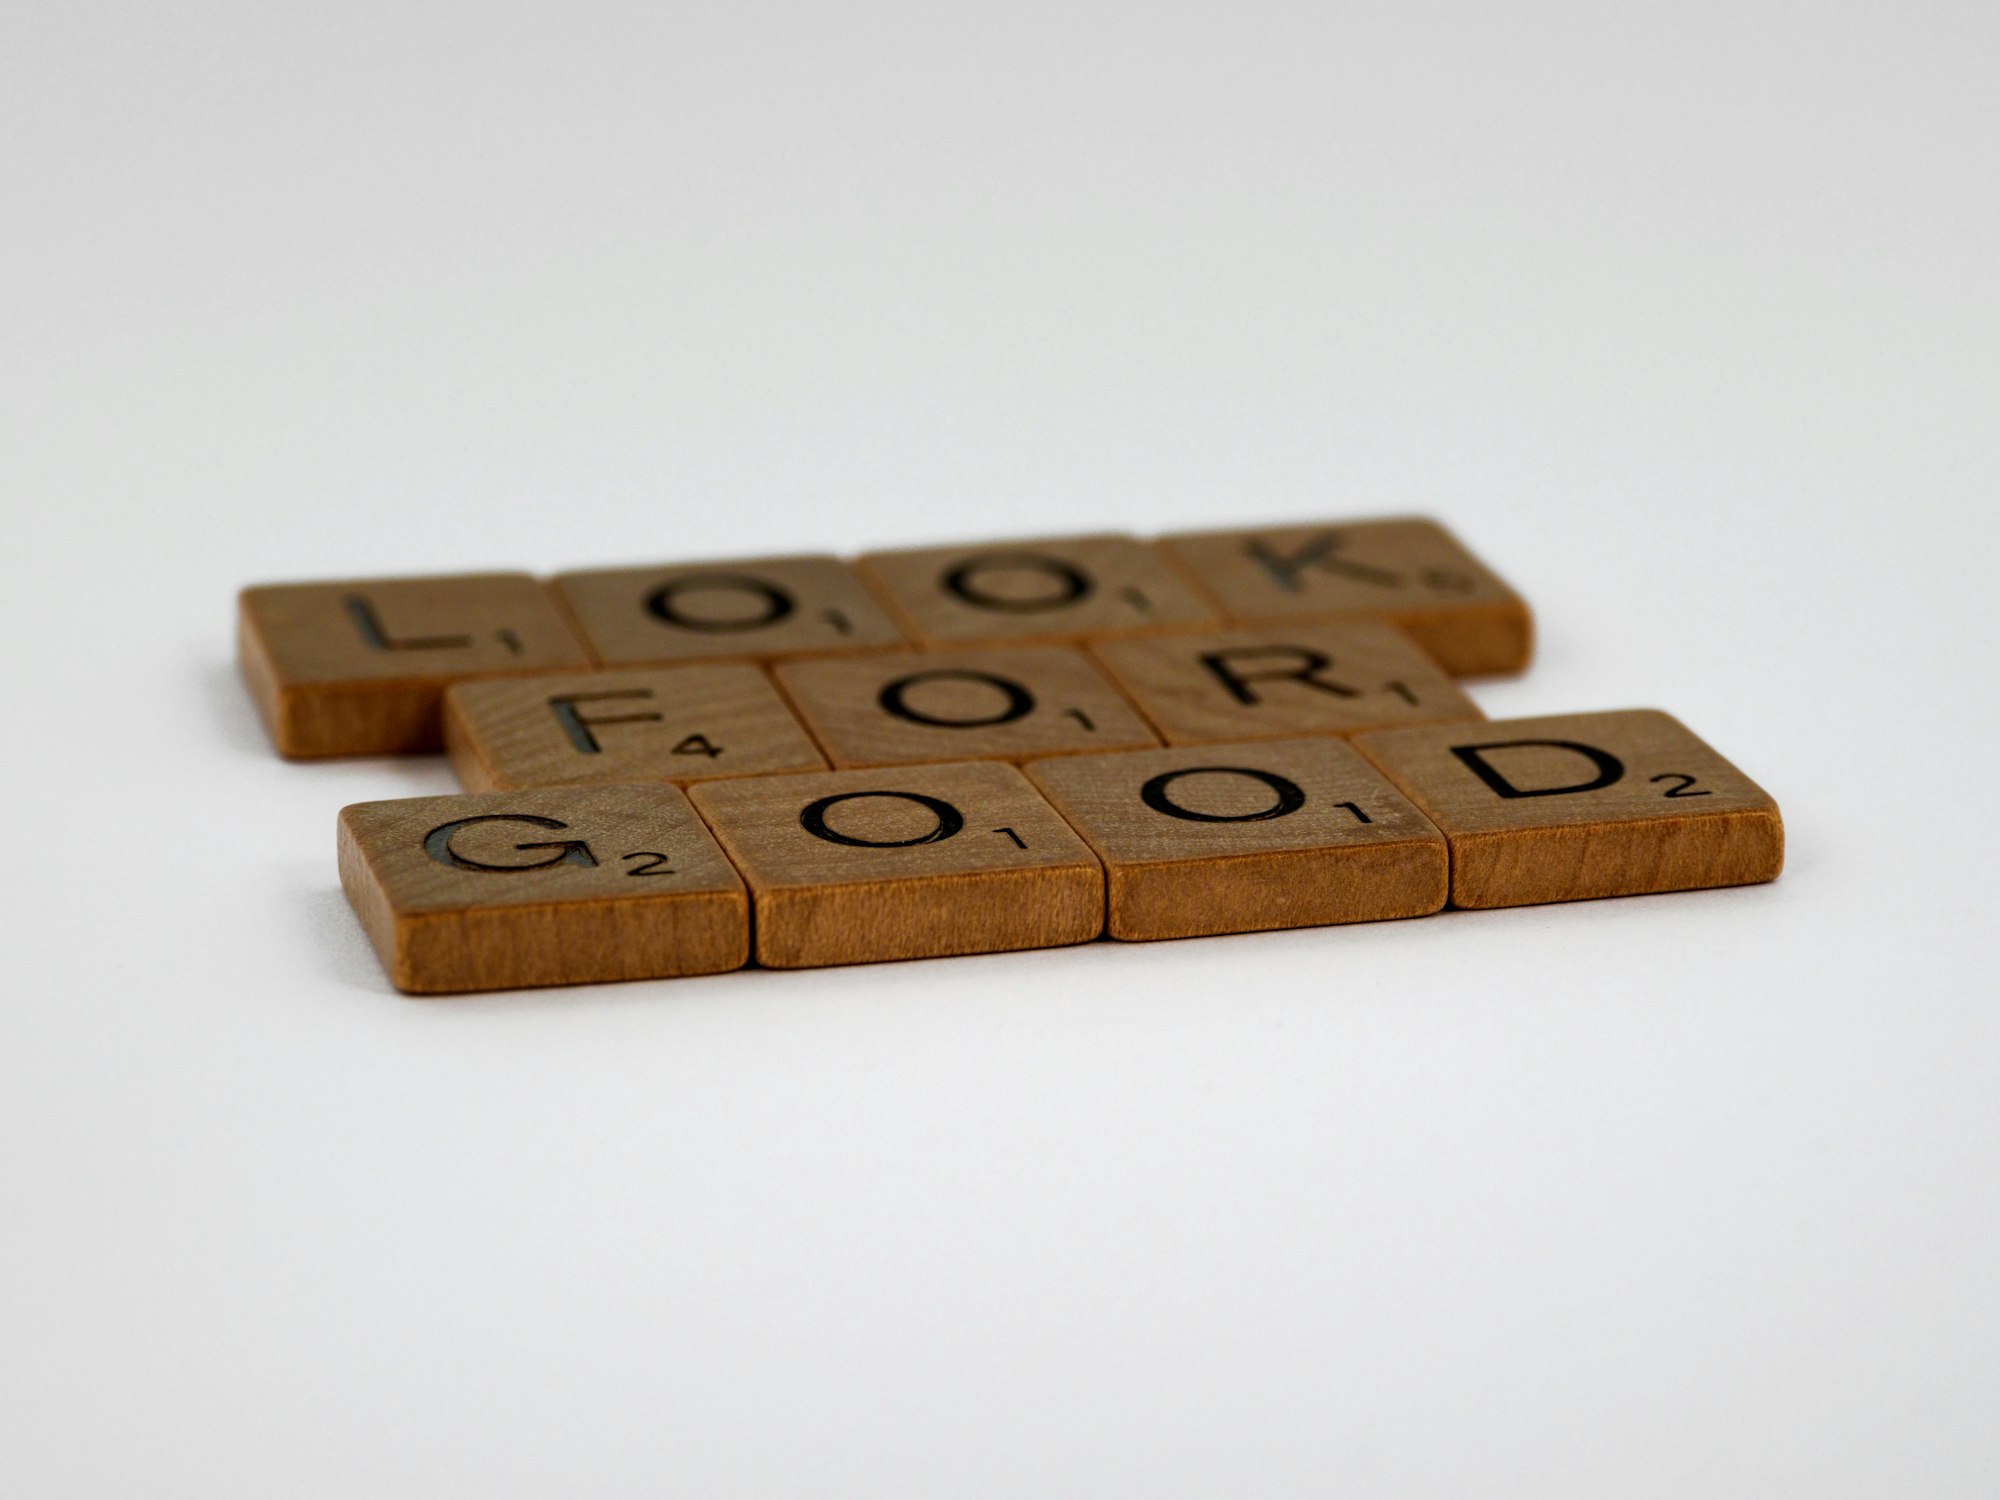 scrabble, scrabble pieces, lettering, letters, wood, scrabble tiles, white background, words, quote, letters, type, typography, design, layout, focus, bokeh, blur, photography, images, image, look for good, optimism, think the best, positivity, mindfulness, he who is not against me is for me, positive, friendly, 
